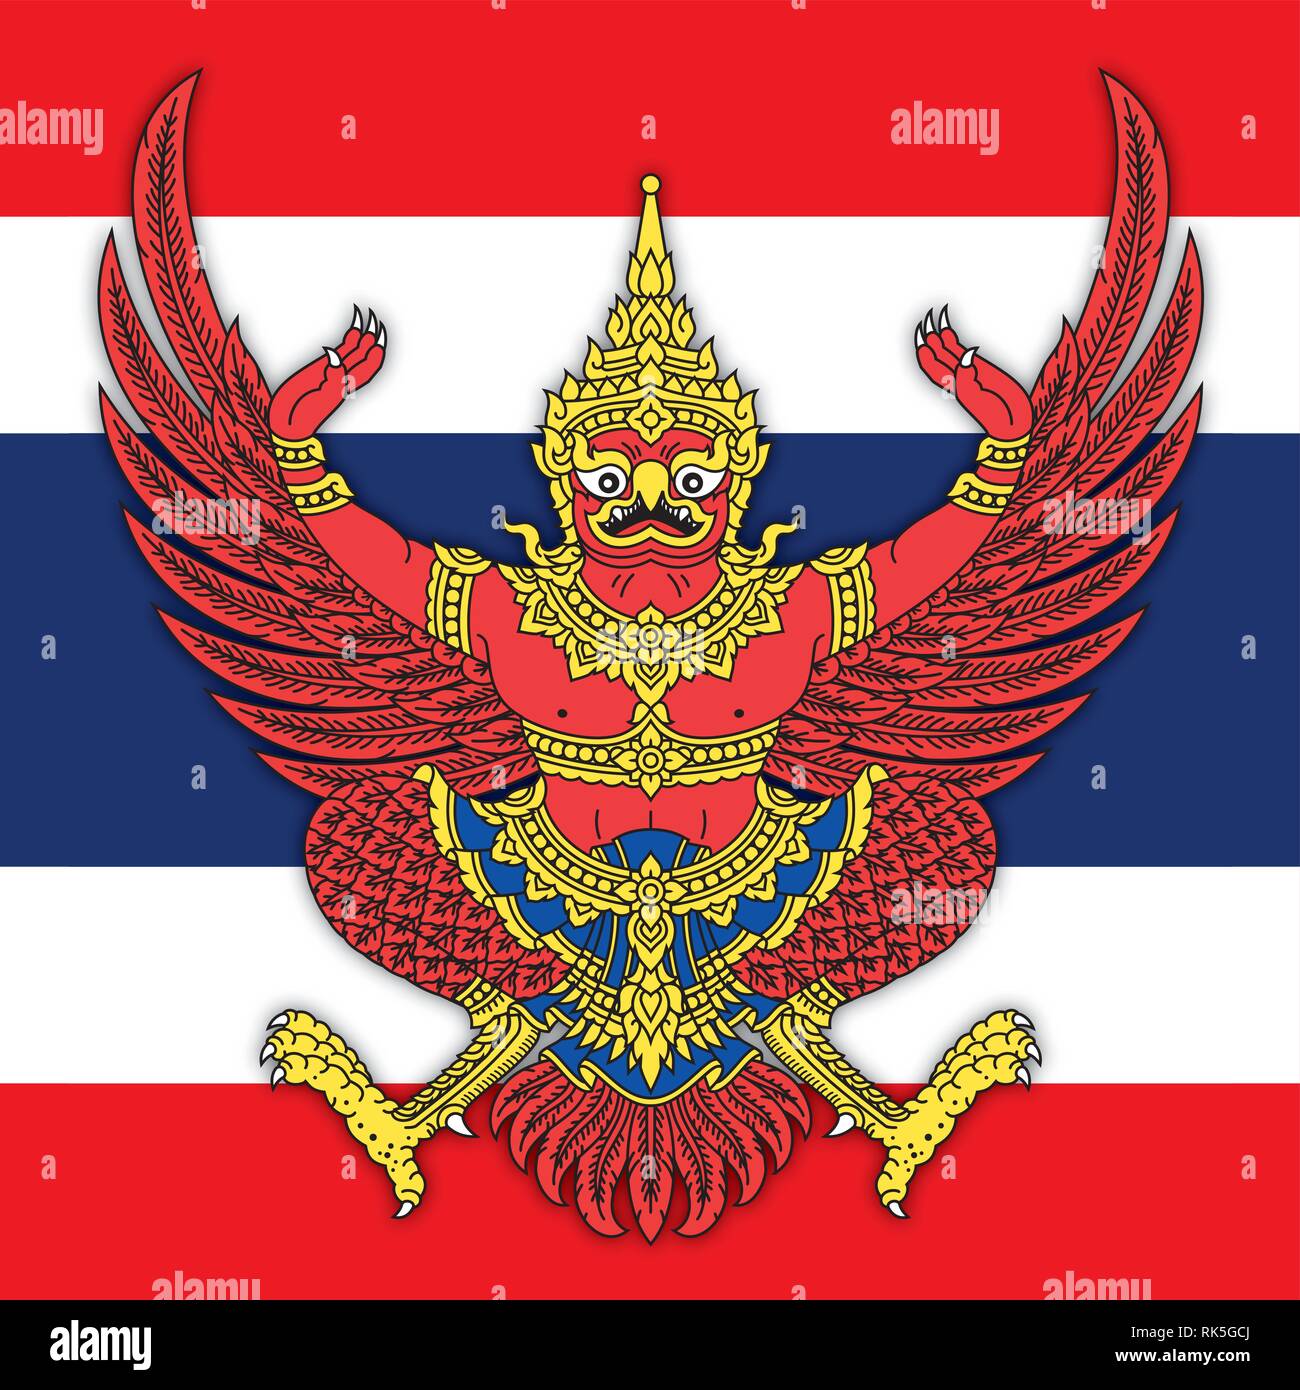 Kingdom of Thailand coat of arms and national flag Stock Vector